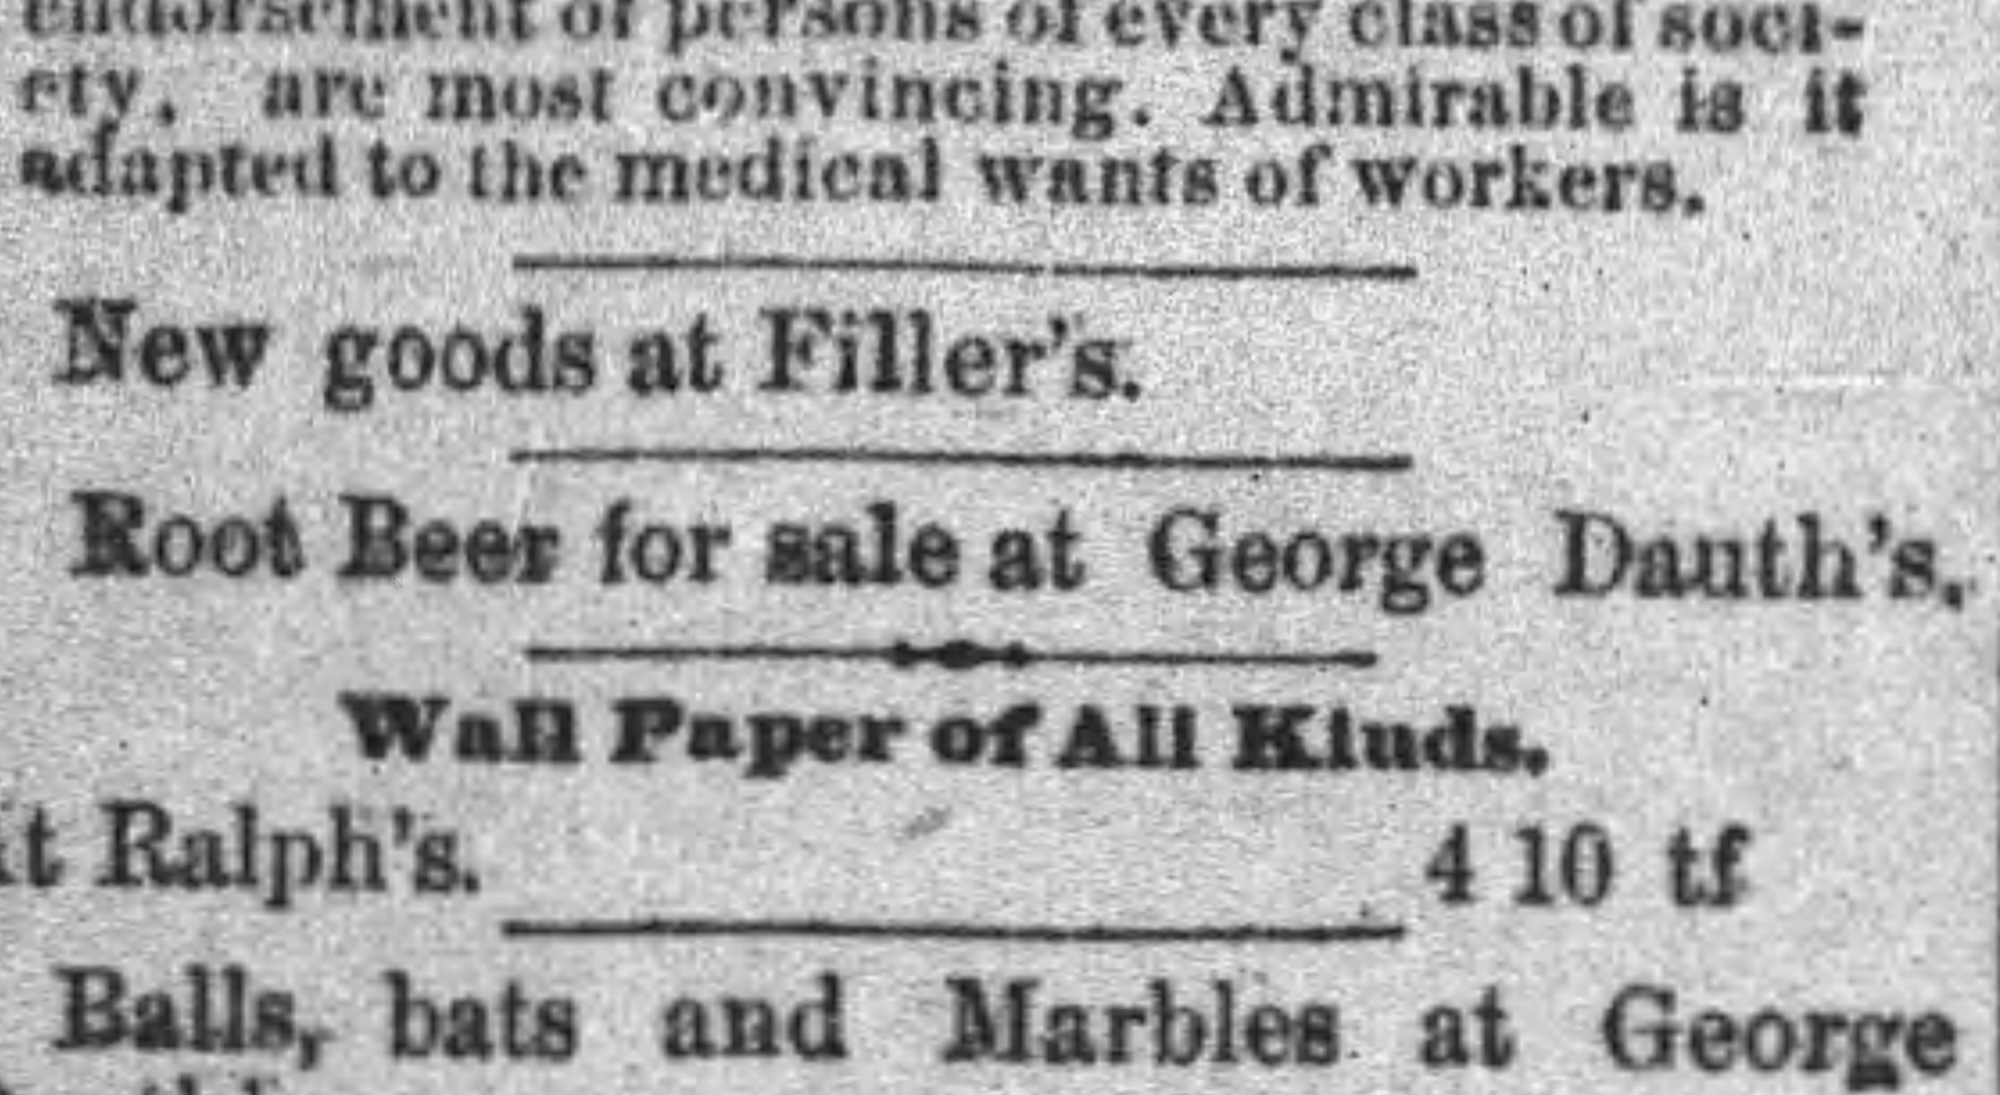 Dauth Family Archive - 1886-04-10 - The Fort Collins Express - George Dauth Root Beer Advertisement